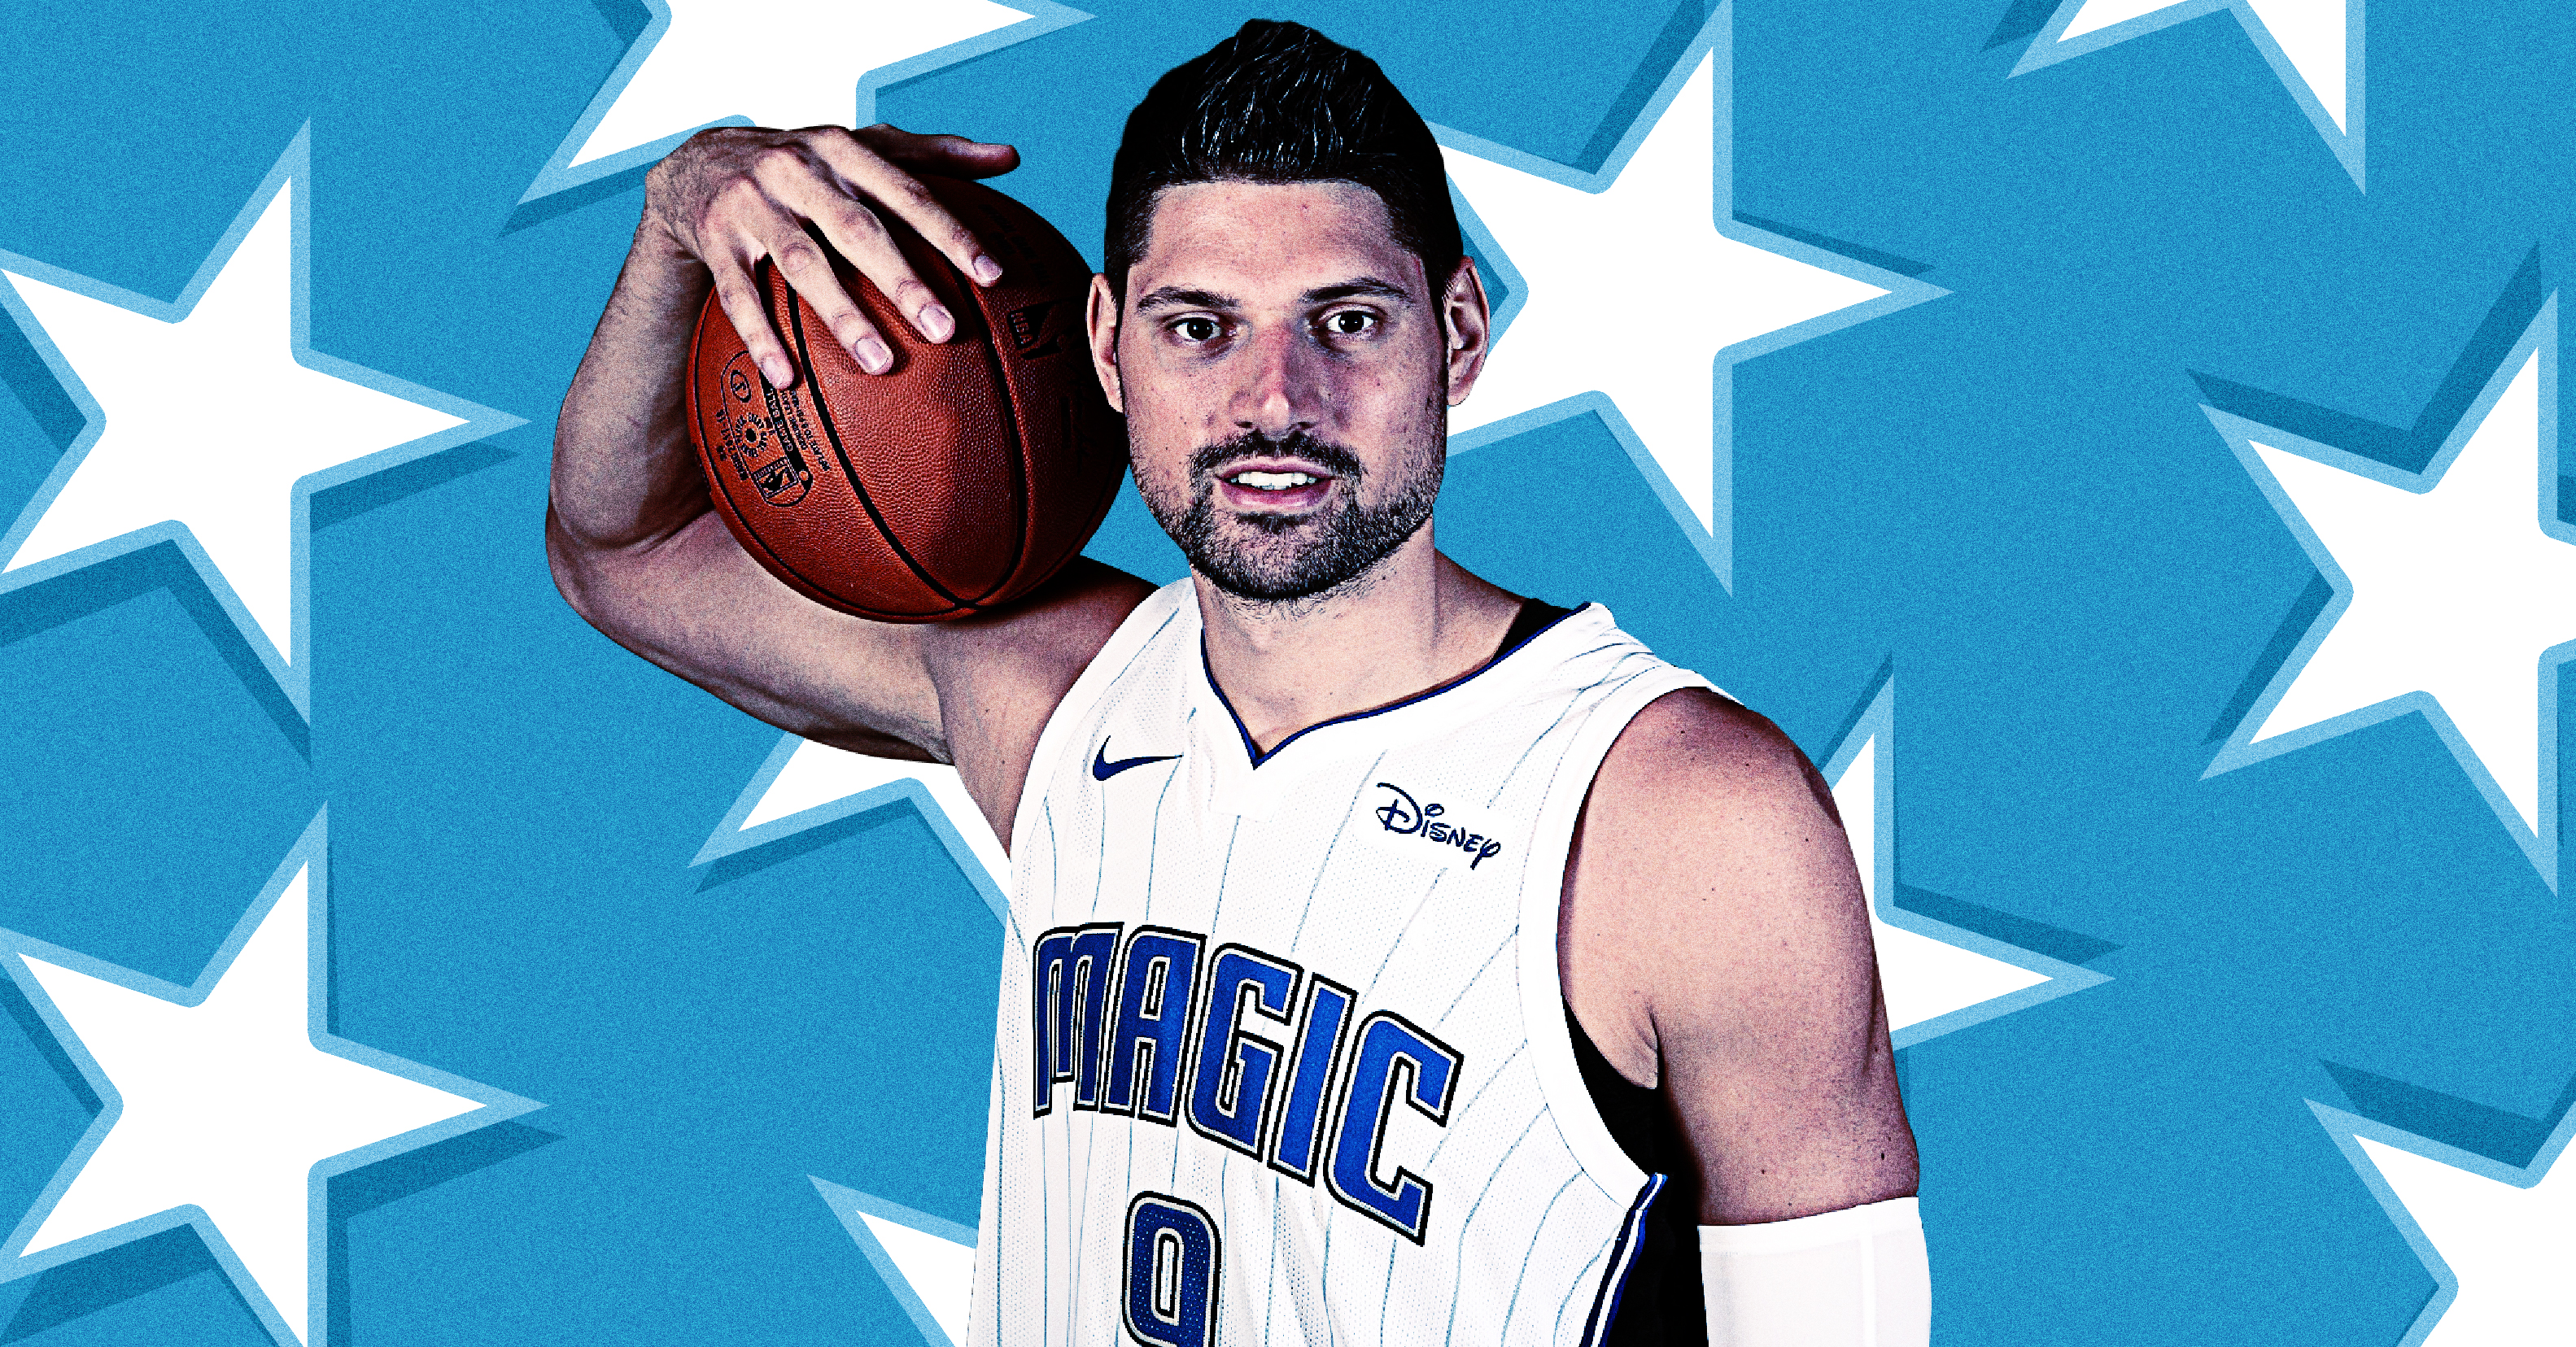 Magic at their best when Nikola Vucevic gets going early